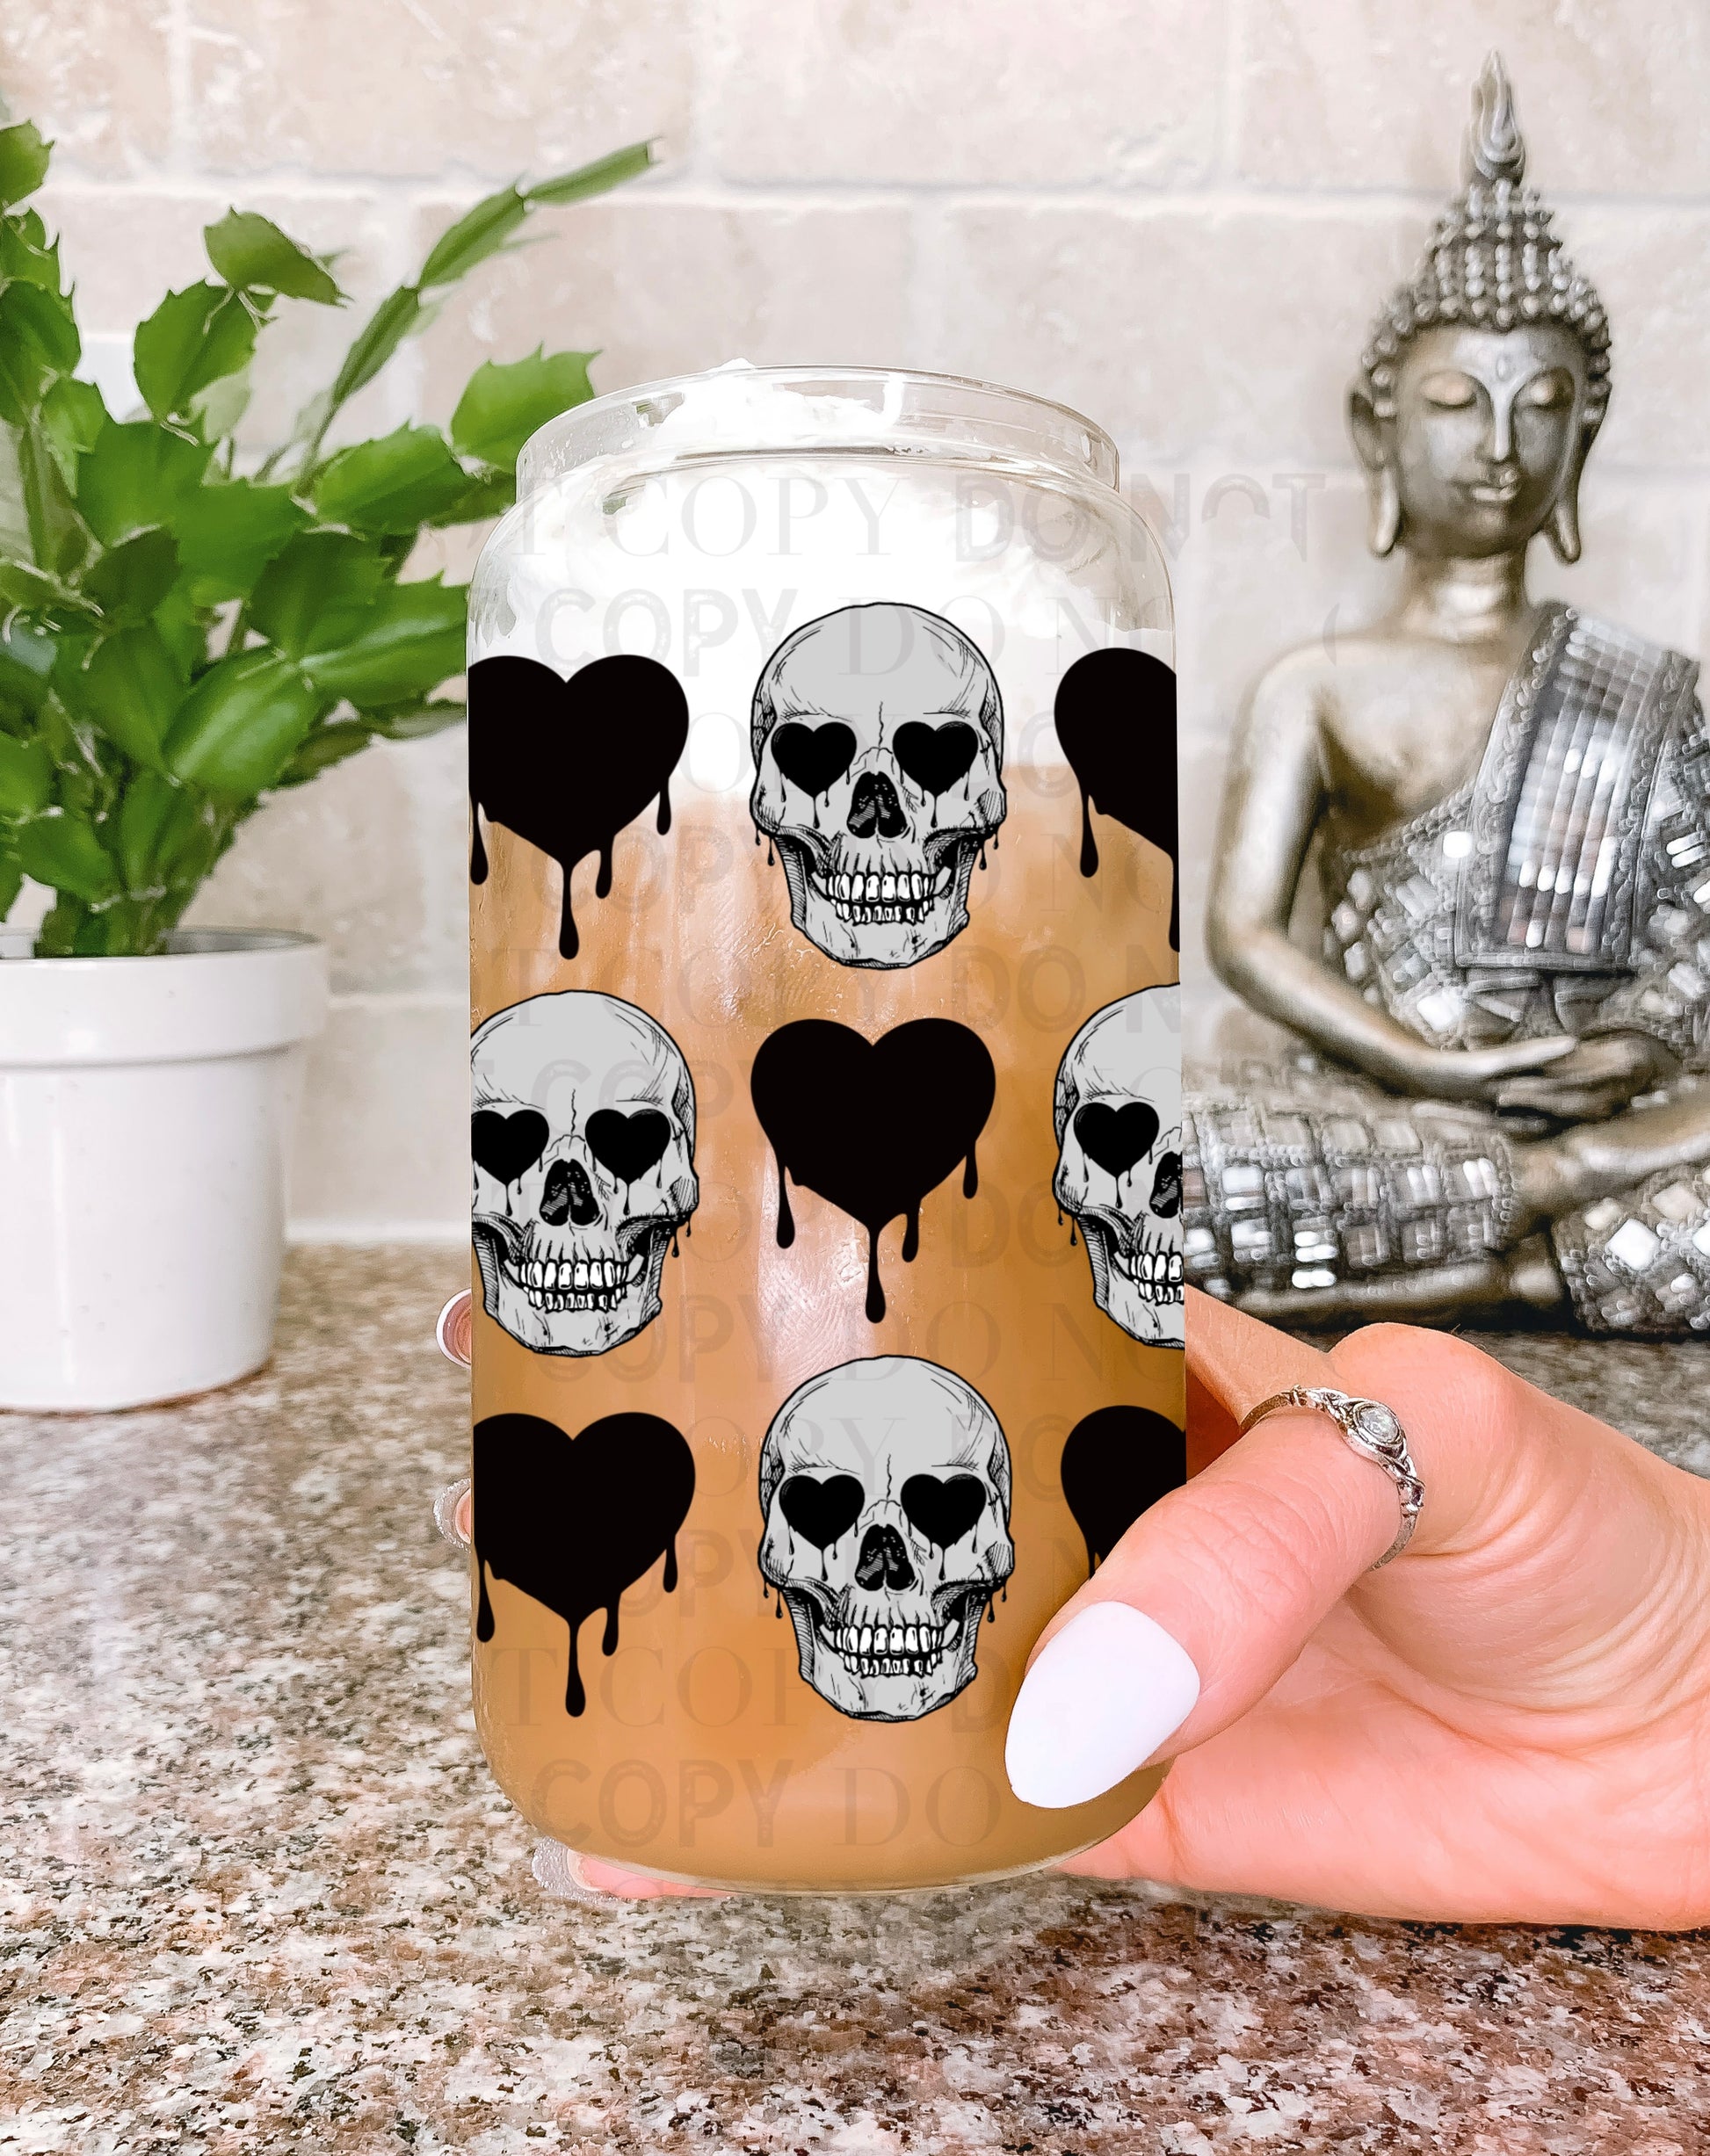 Skull drippy hearts tumbler wrap sized for 16 oz frosted cup from mother tumbler  Cerra's Shop Creates   